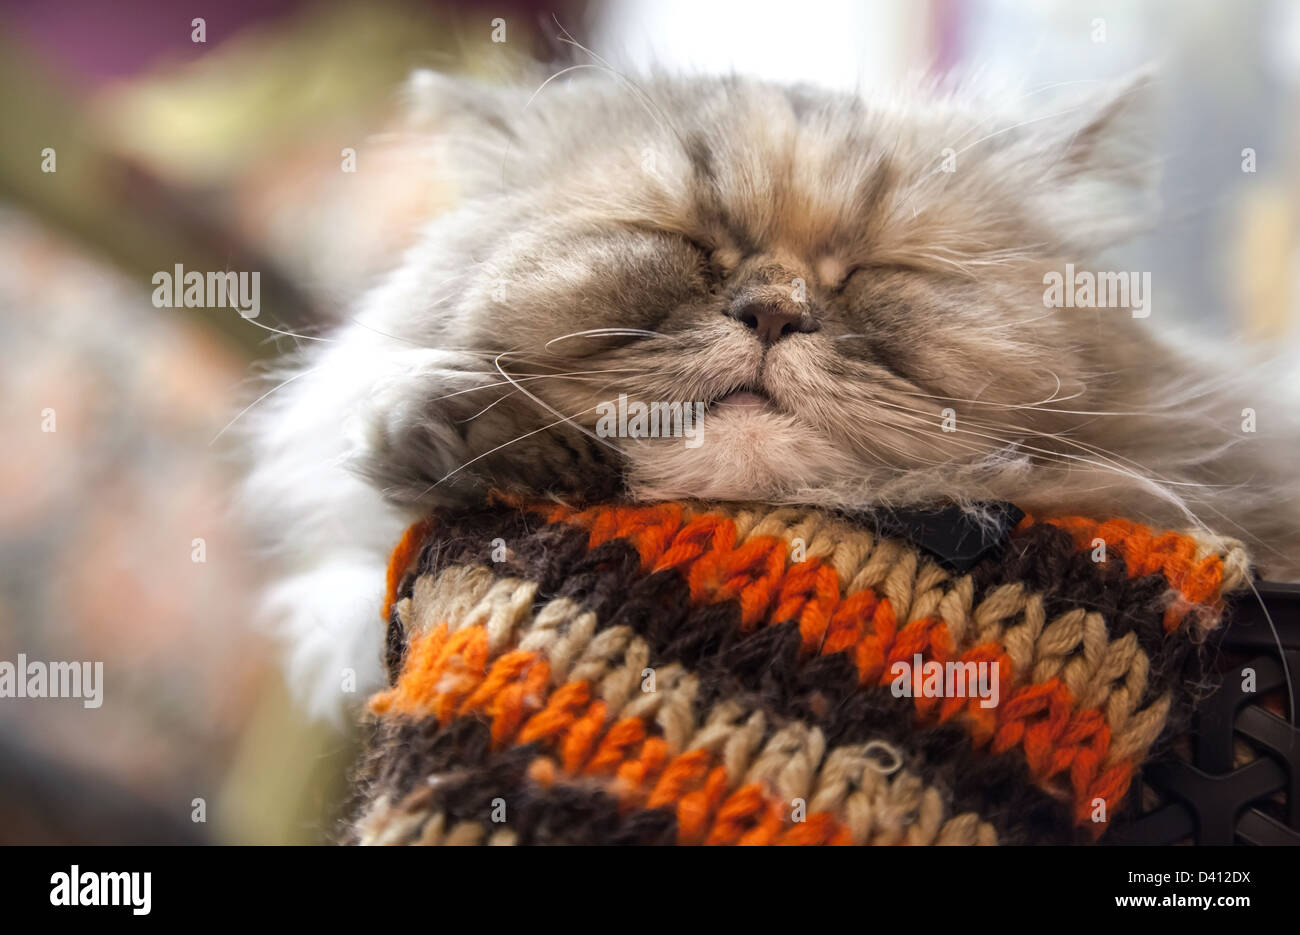 Long-haired Persian cat sleeps with comfort on the woolen striped scarf Stock Photo